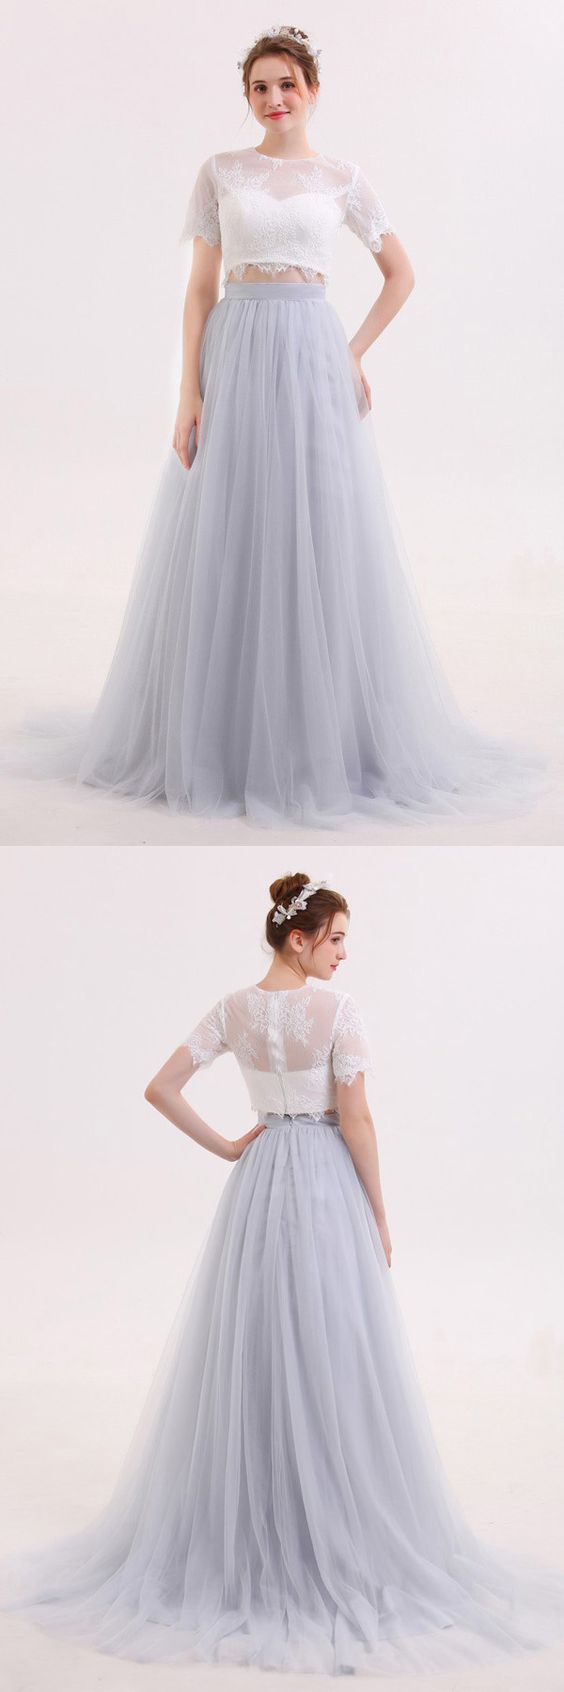 Long Tulle Skirt Two Piece Wedding Dress with Lace Crop Top,GDC1215-Dolly Gown